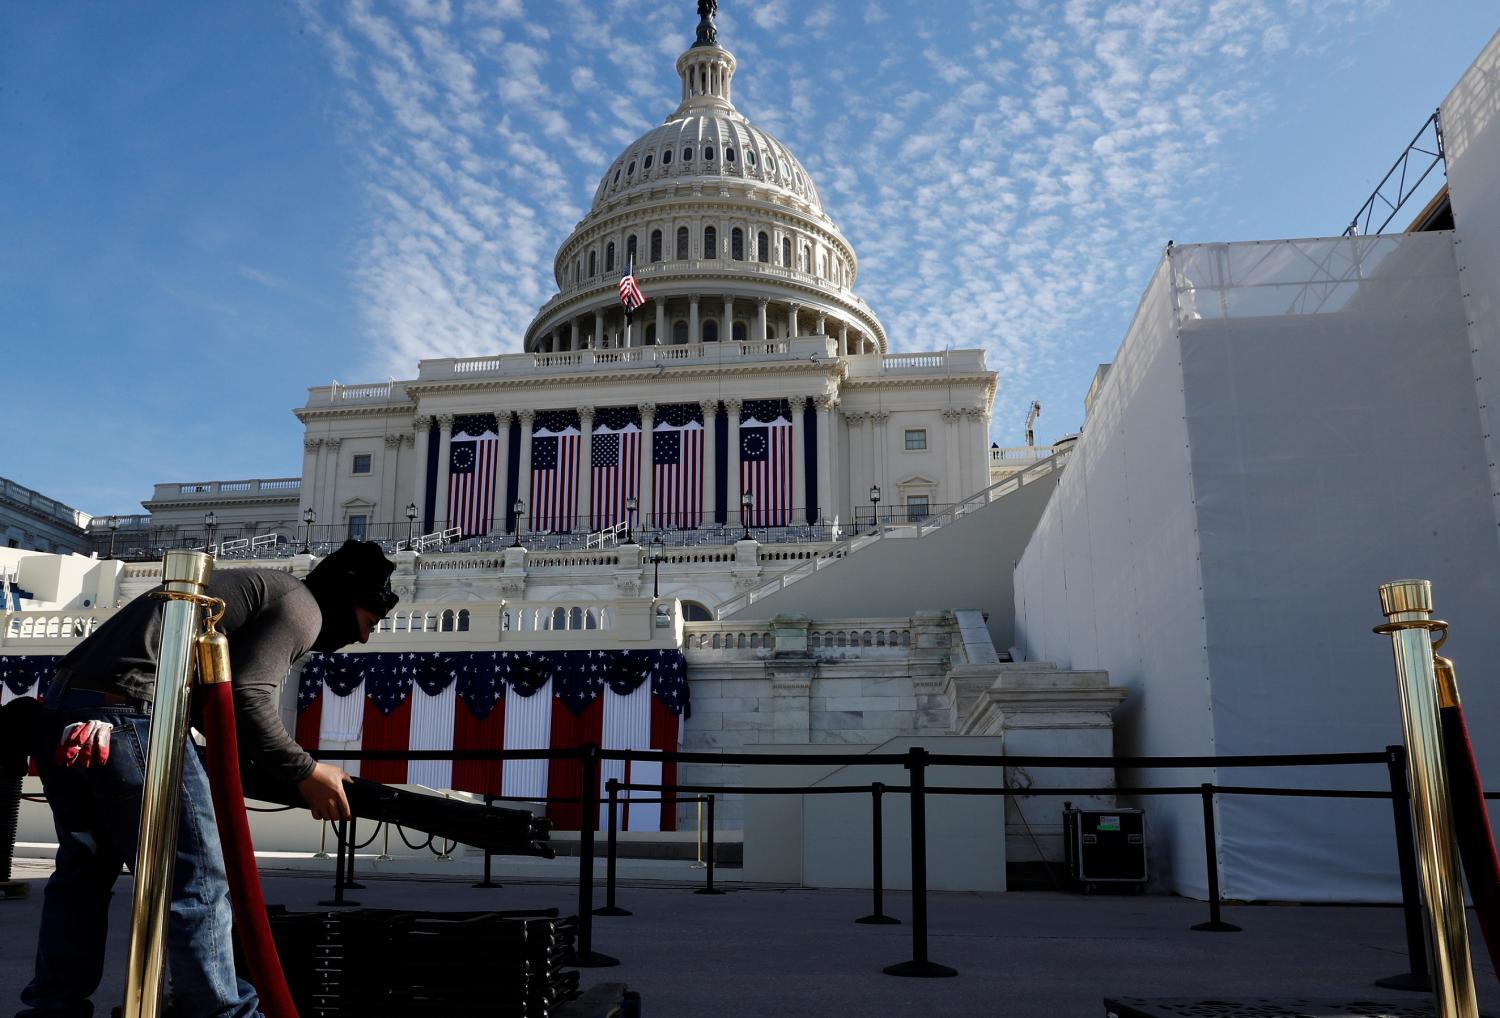 A worker cleans up the West Front of the U.S. Capitol and dismantles the inaugural platform and seating area the day after President Joe Biden was inaugurated as the 46th president of the United States on Capitol Hill in Washington, US, January 21, 2021. REUTERS/Jim Bourg